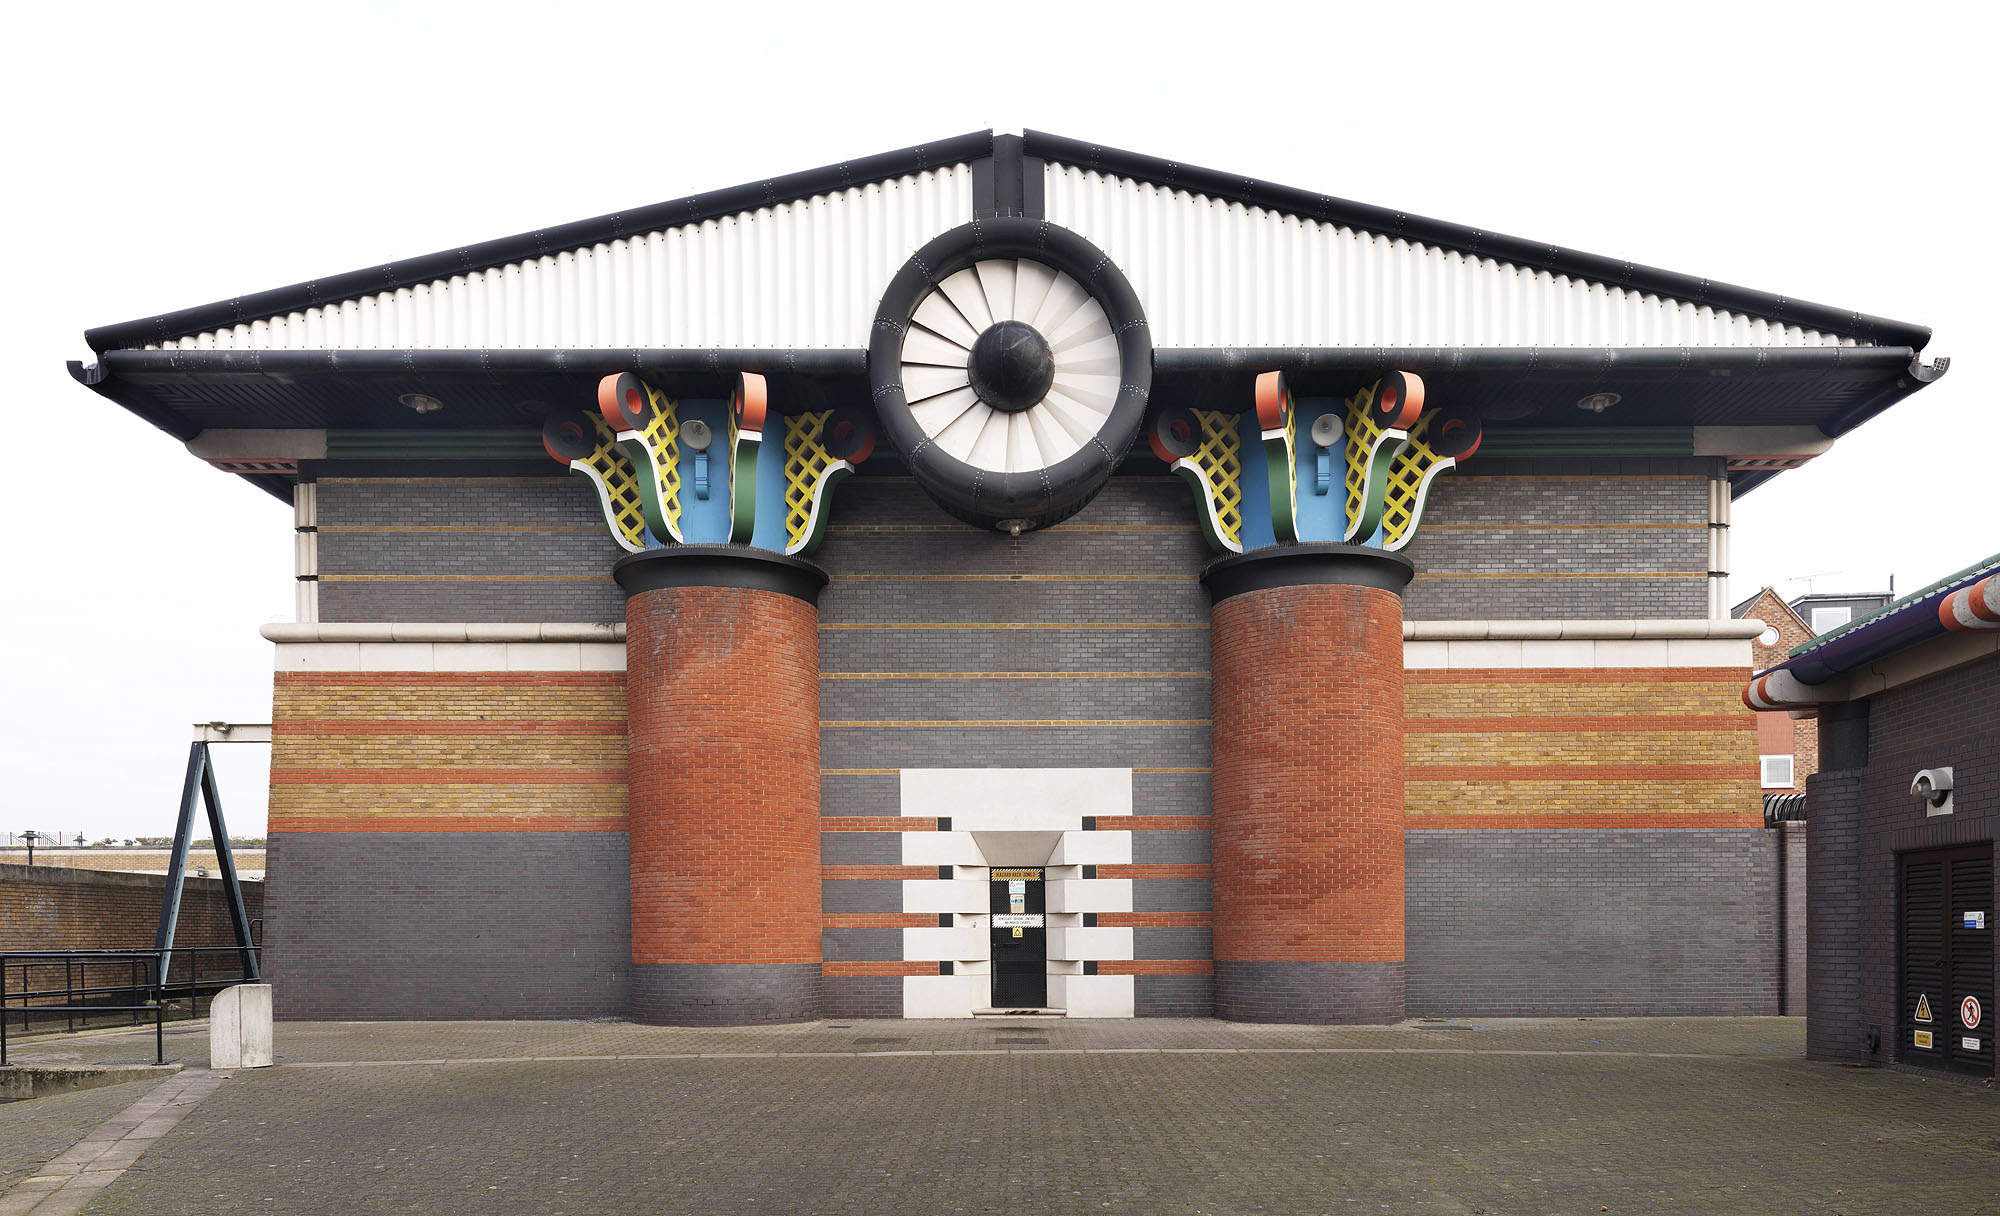 The Isle of Dogs Pumping Station, 1986-1988 by John Outram, is listed at Grade II*